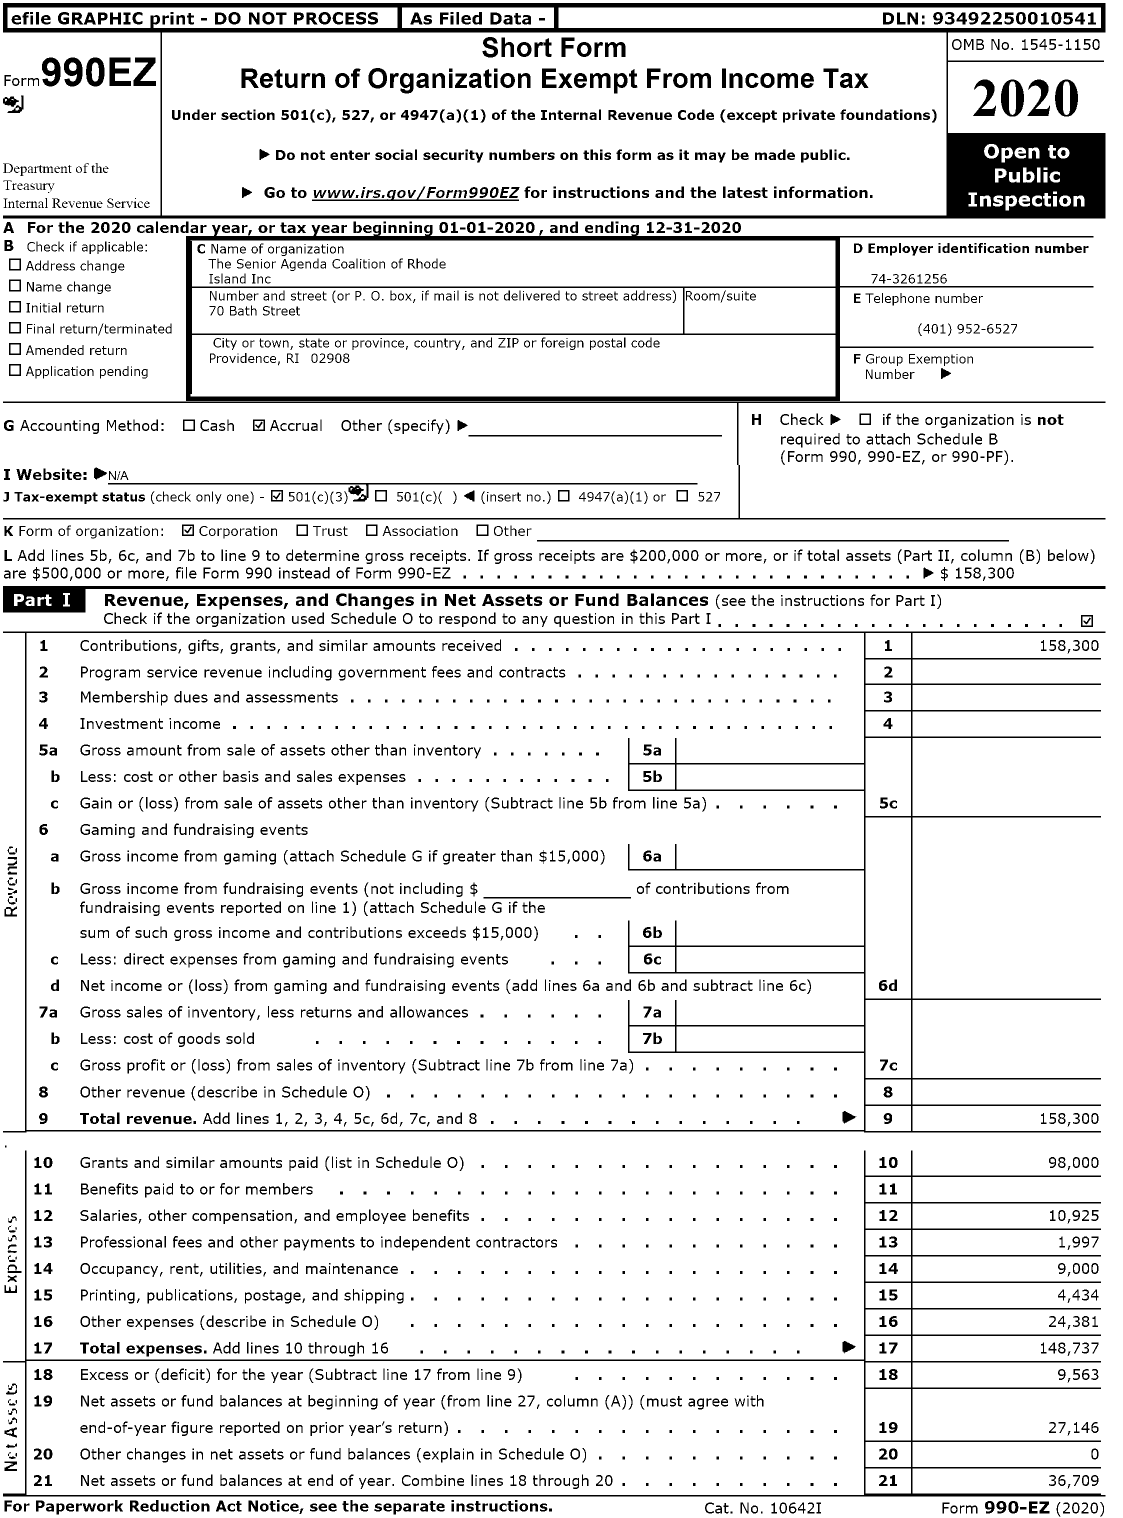 Image of first page of 2020 Form 990EZ for The Senior Agenda Coalition of Rhode Island